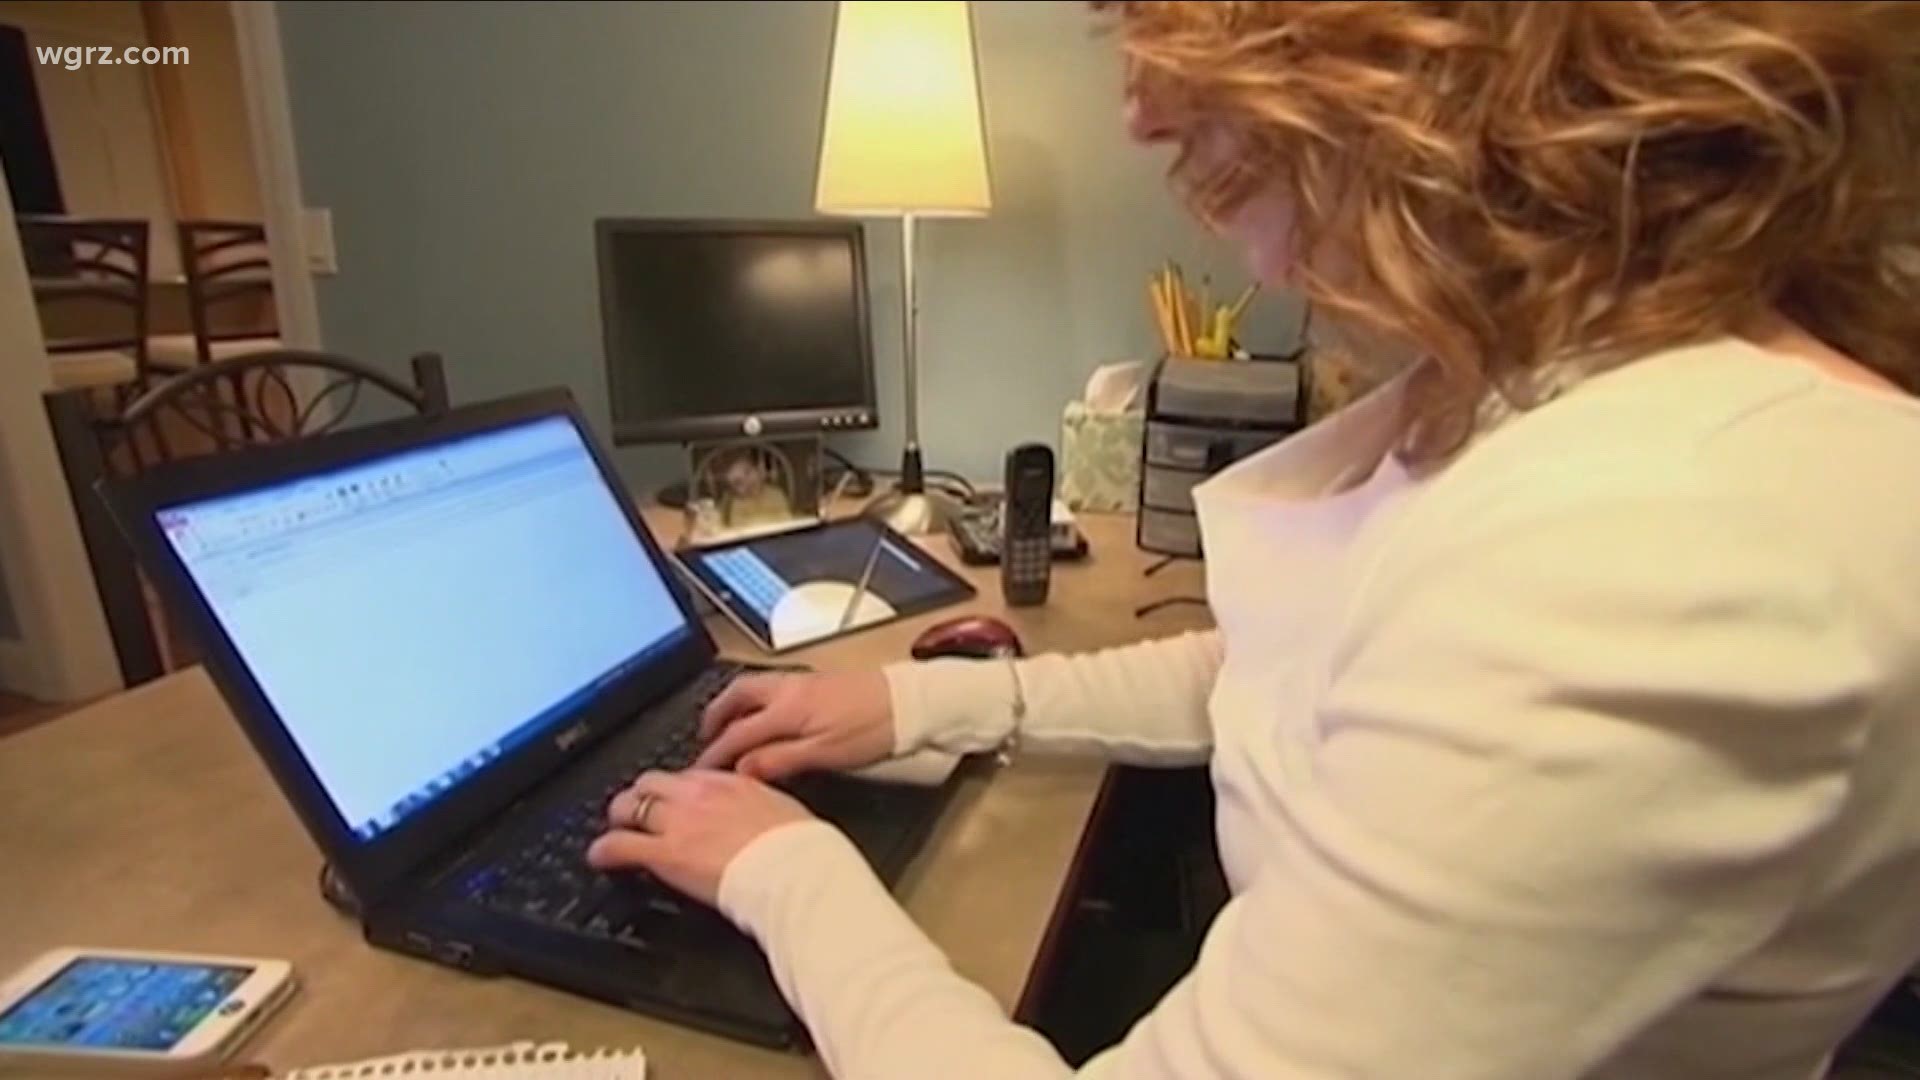 Experts say many workers can expect to still work virtually part of the time.